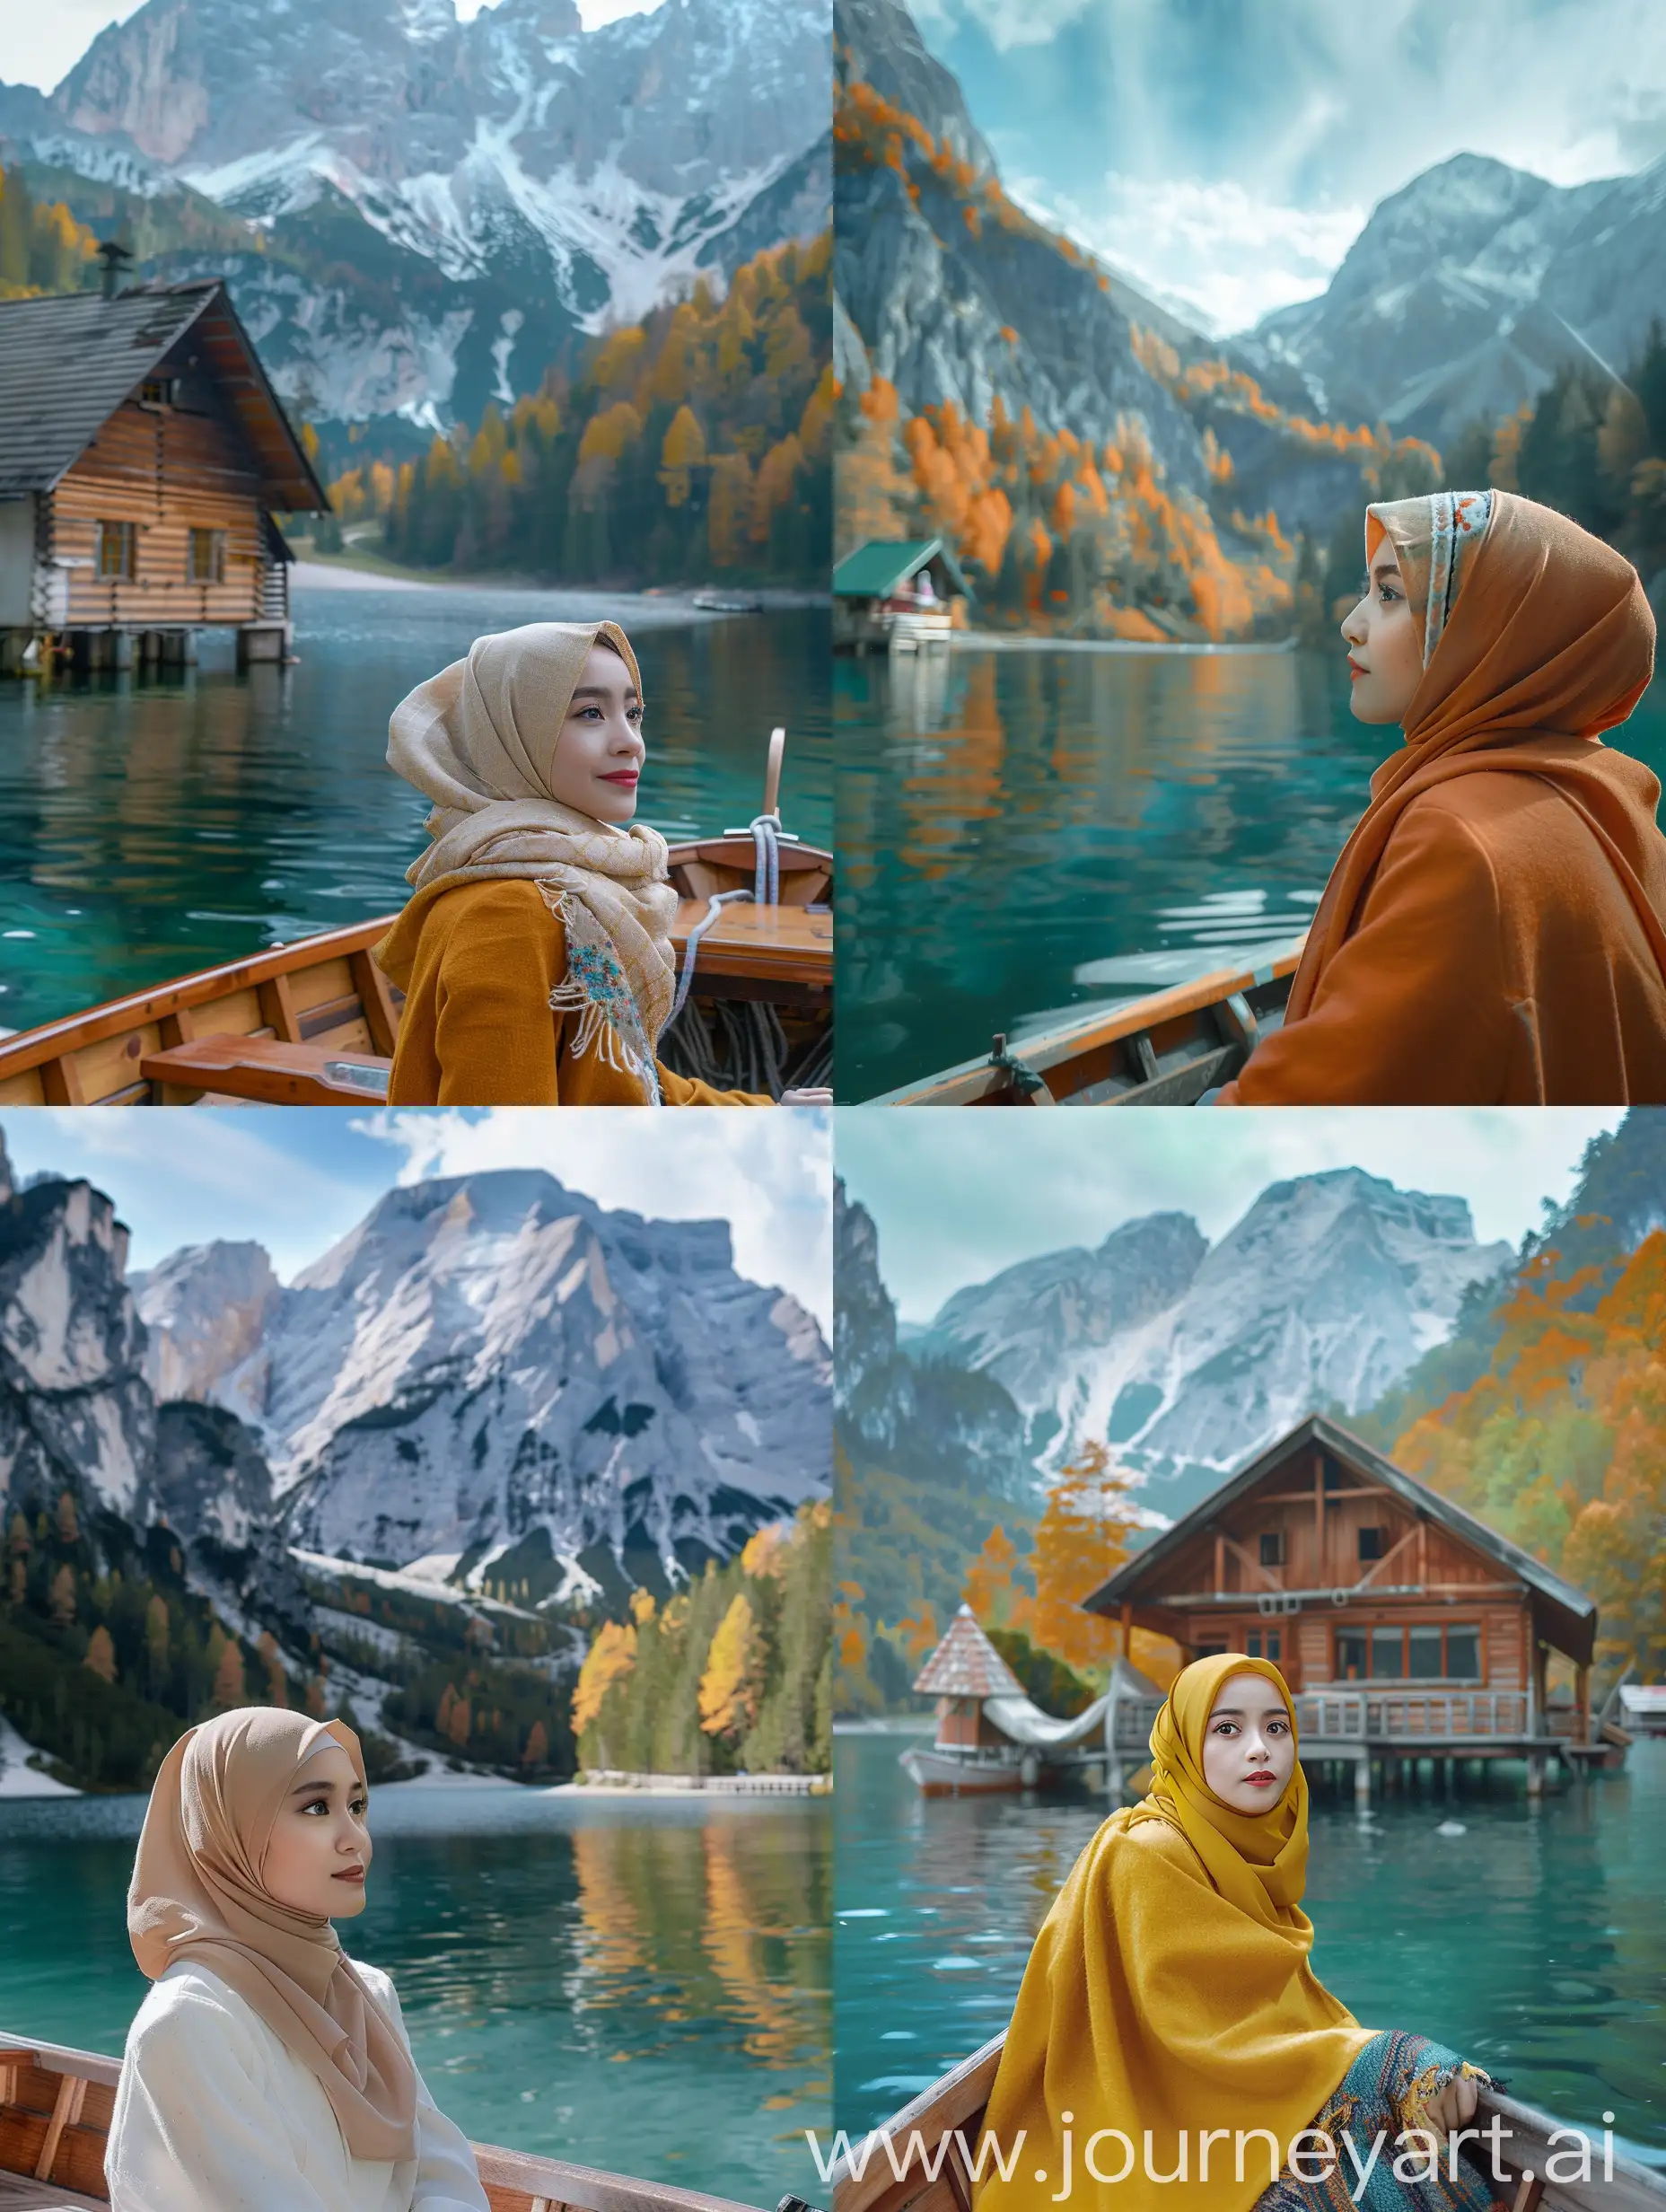 Highly detailed, realistic 35mm photo featuring a bright and cheerful young Indonesian hijab woman gazing into the distance while sailing on a boat. The backdrop is a serene lakeside cabin surrounded by lush greenery and bright fall colors. In the background, majestic mountains with patches of snow add to the beauty of the view. The calm blue waters of the lake reflect the natural surroundings, creating a beautiful and serene view. This cabin, with its cozy and inviting appearance, is located on the water's edge, offering the perfect retreat to nature.